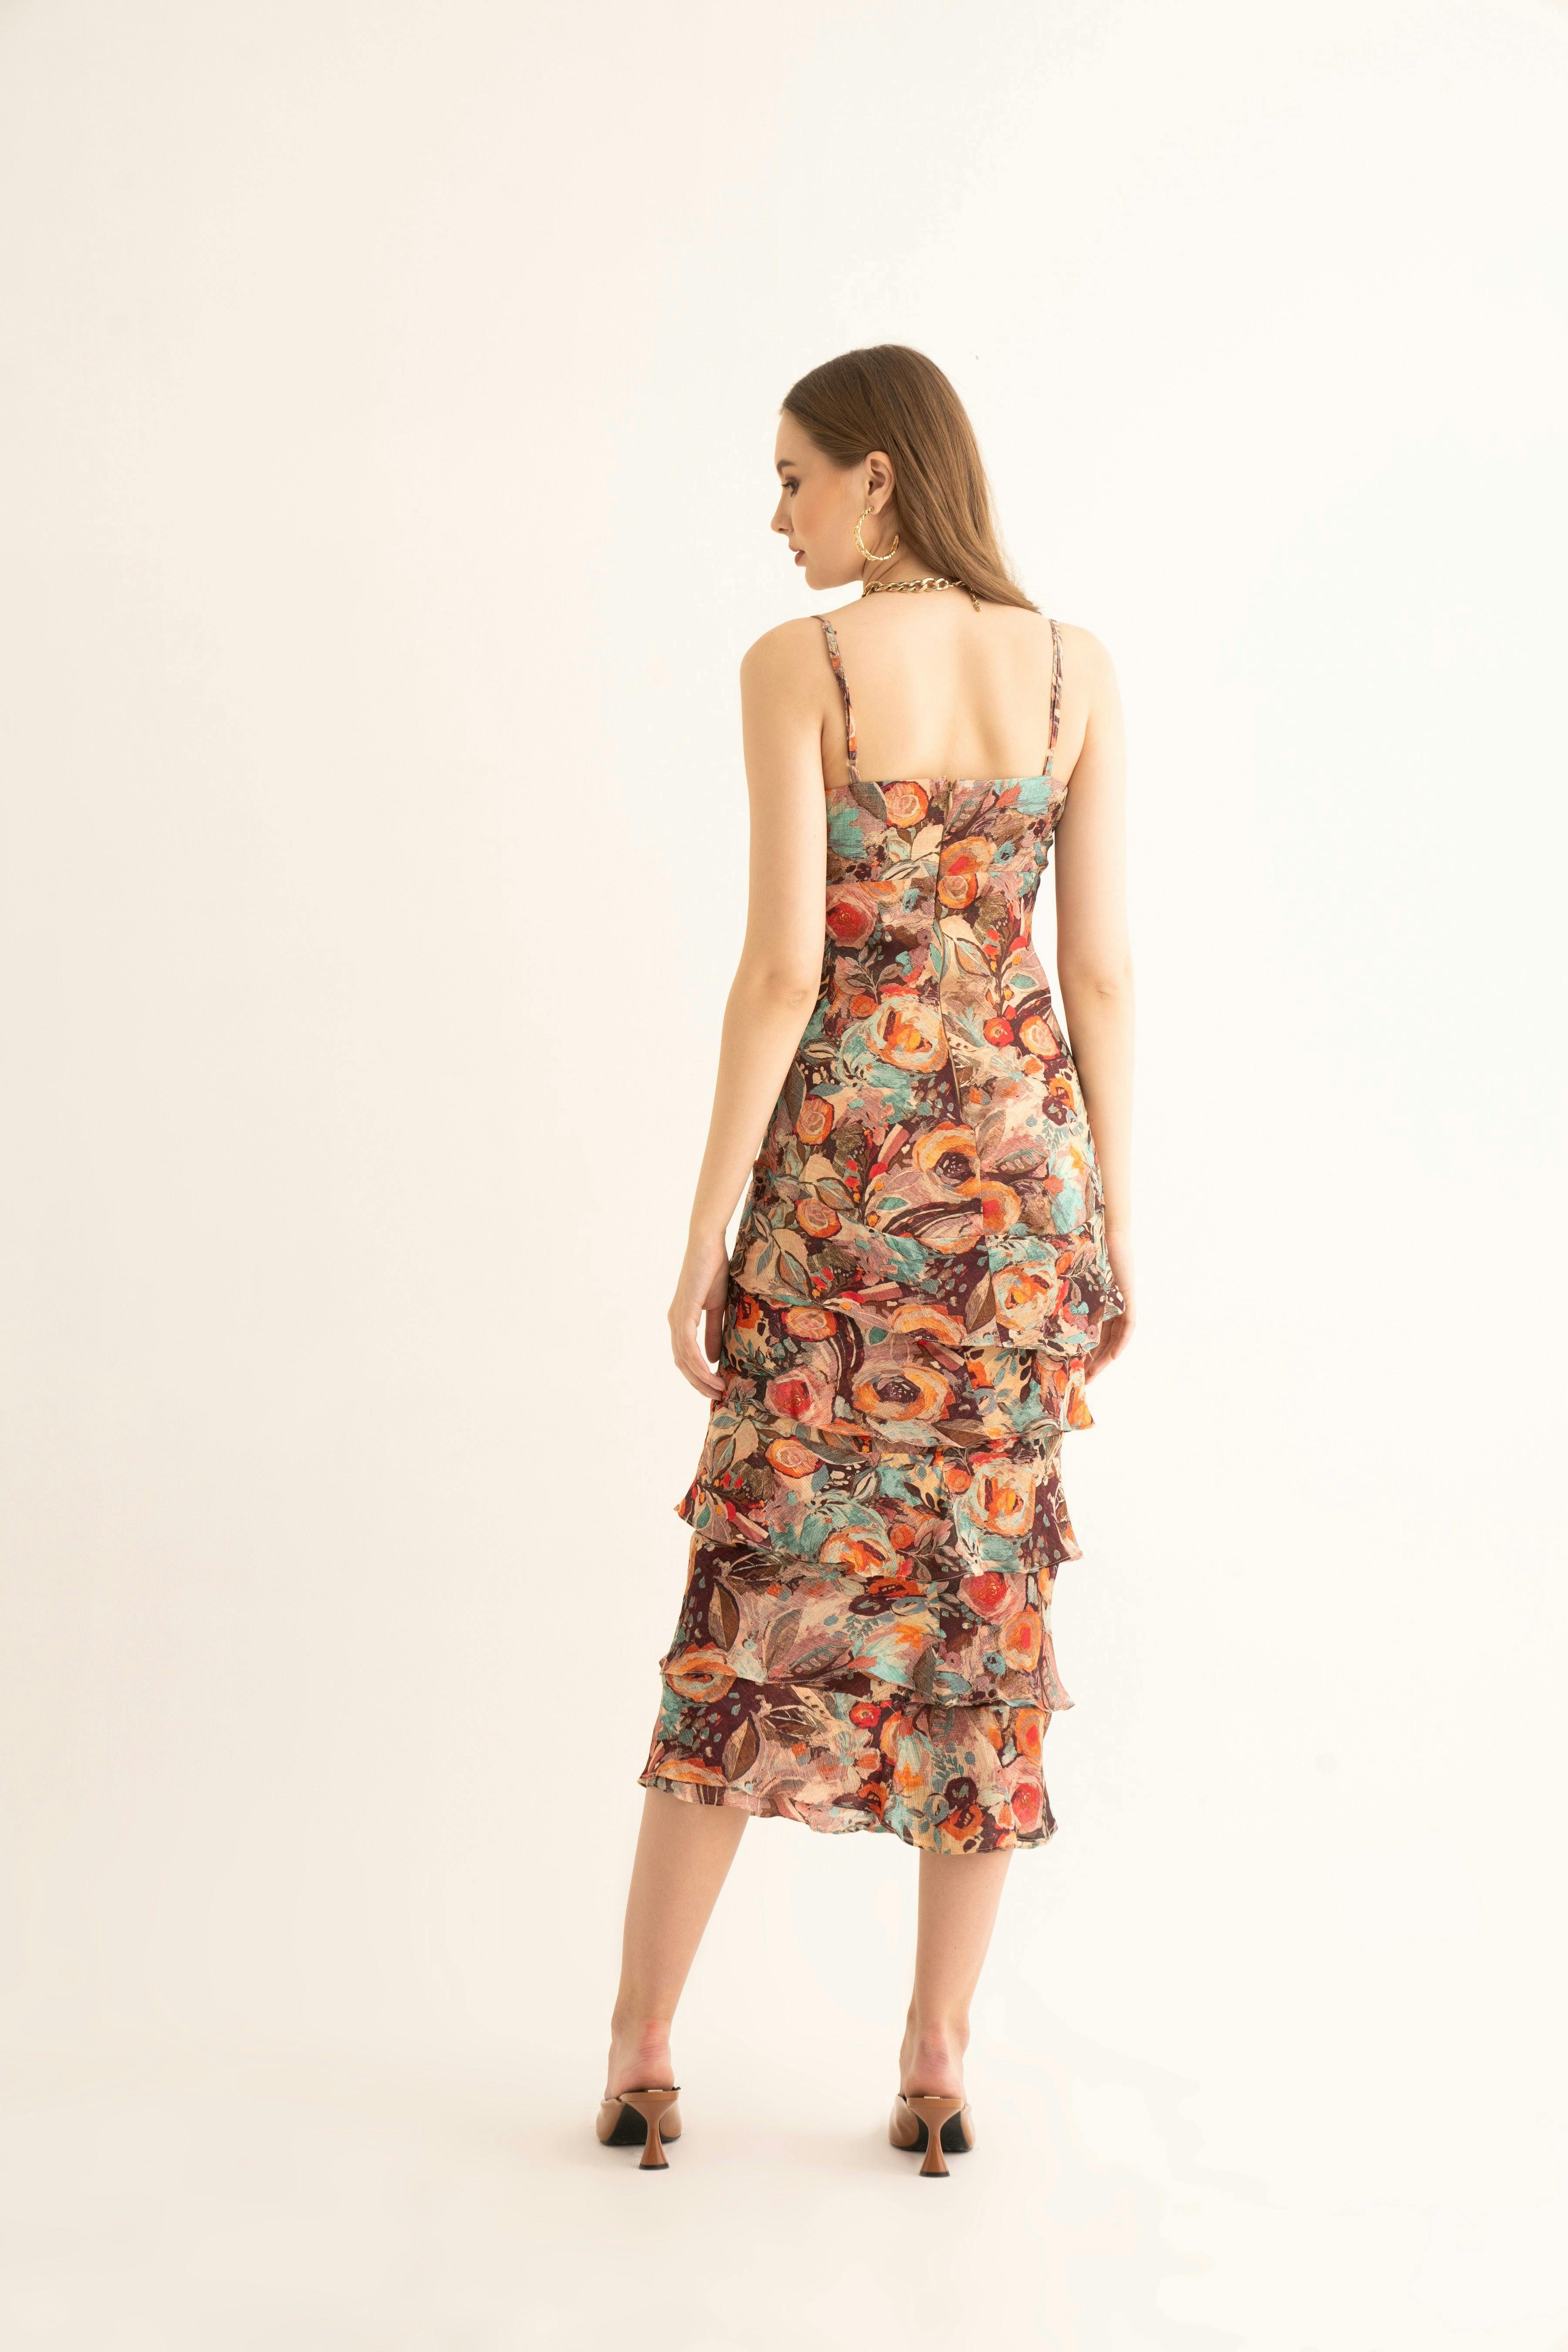 Thumbnail preview #4 for Smudged Floral Maxi Ruffle Dress